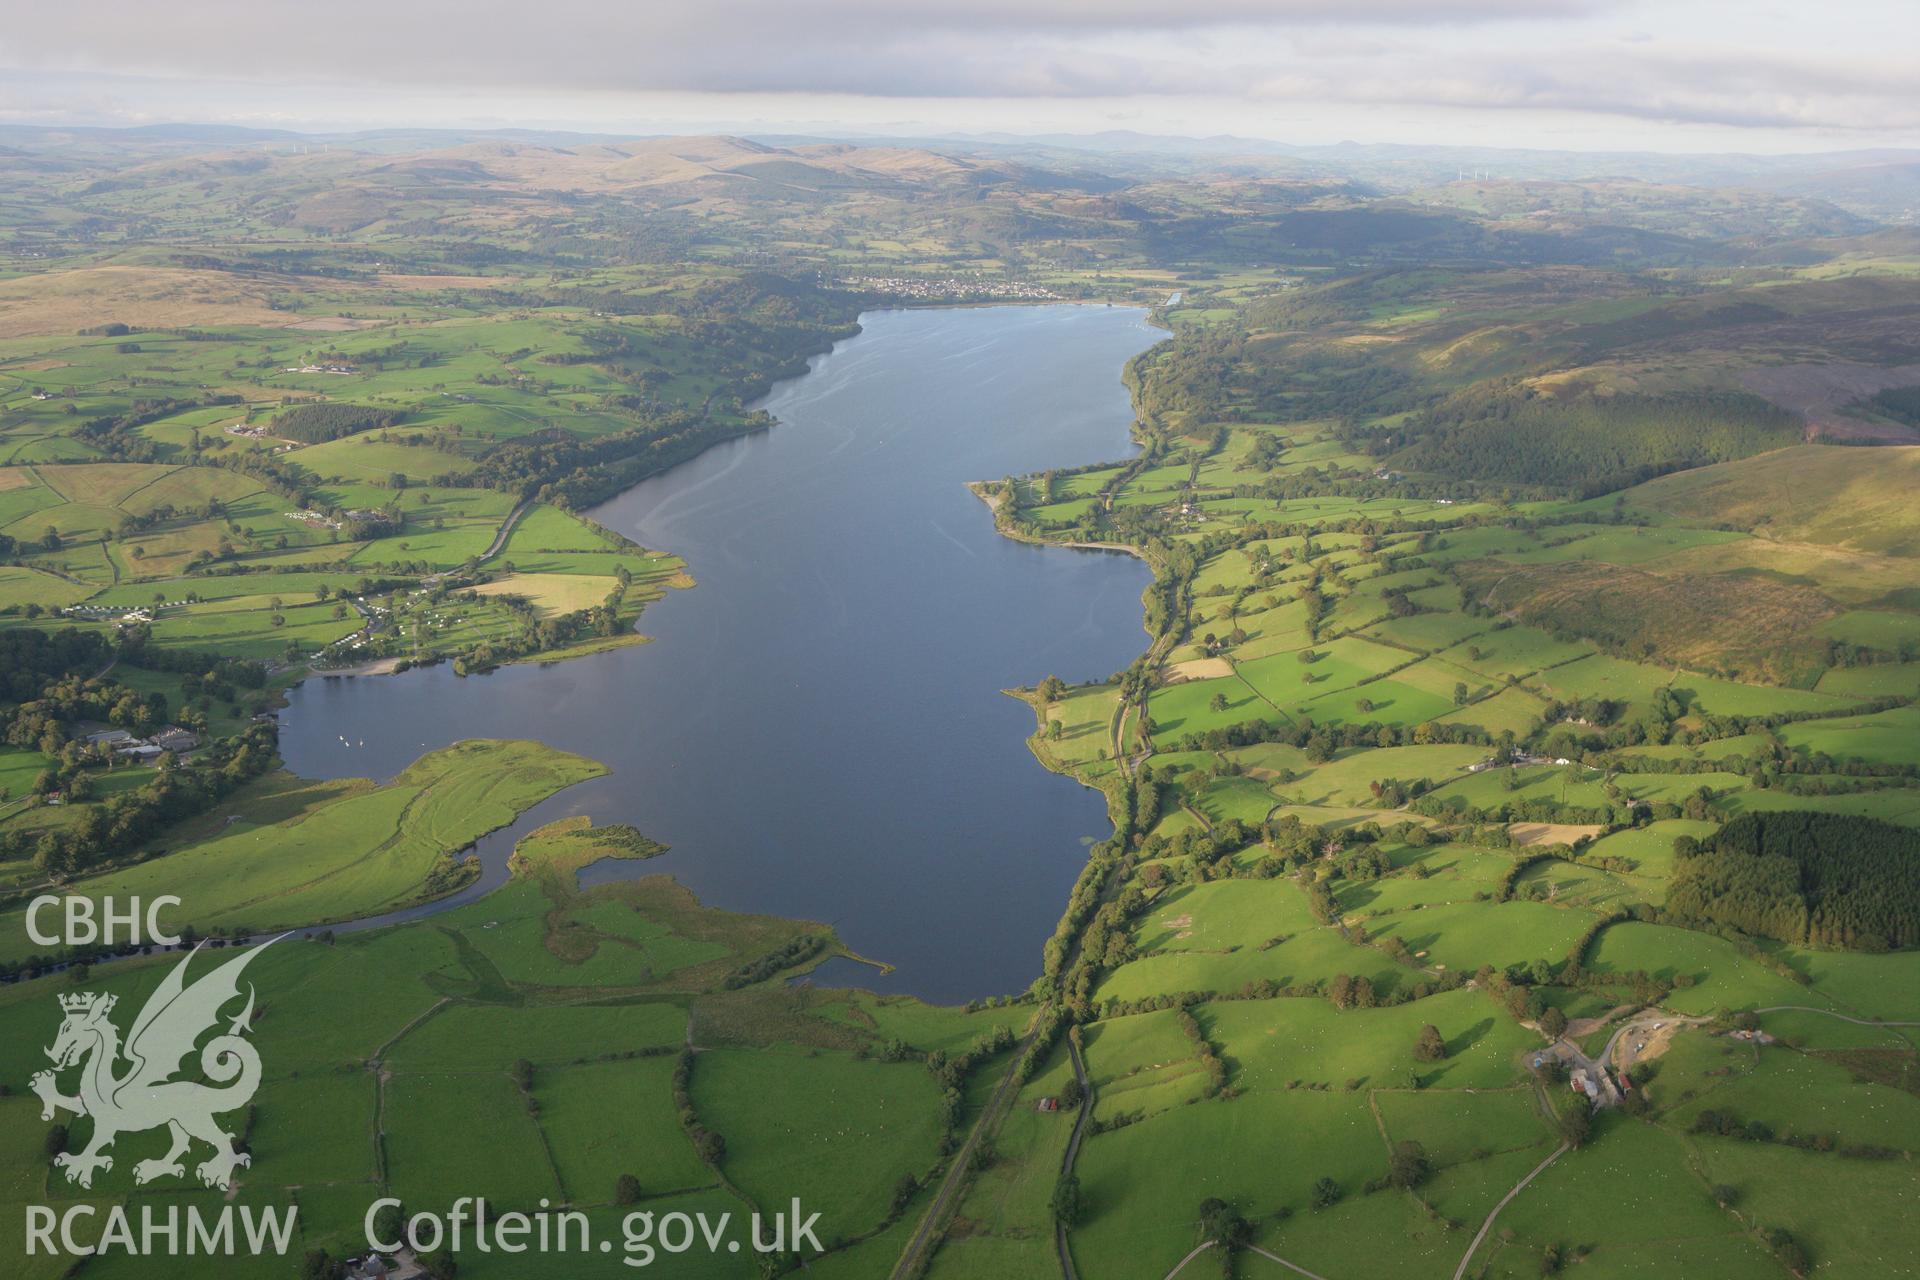 RCAHMW colour oblique aerial photograph of Llyn Tegid (Bala Lake), viewed from the south-west. Taken on 06 September 2007 by Toby Driver